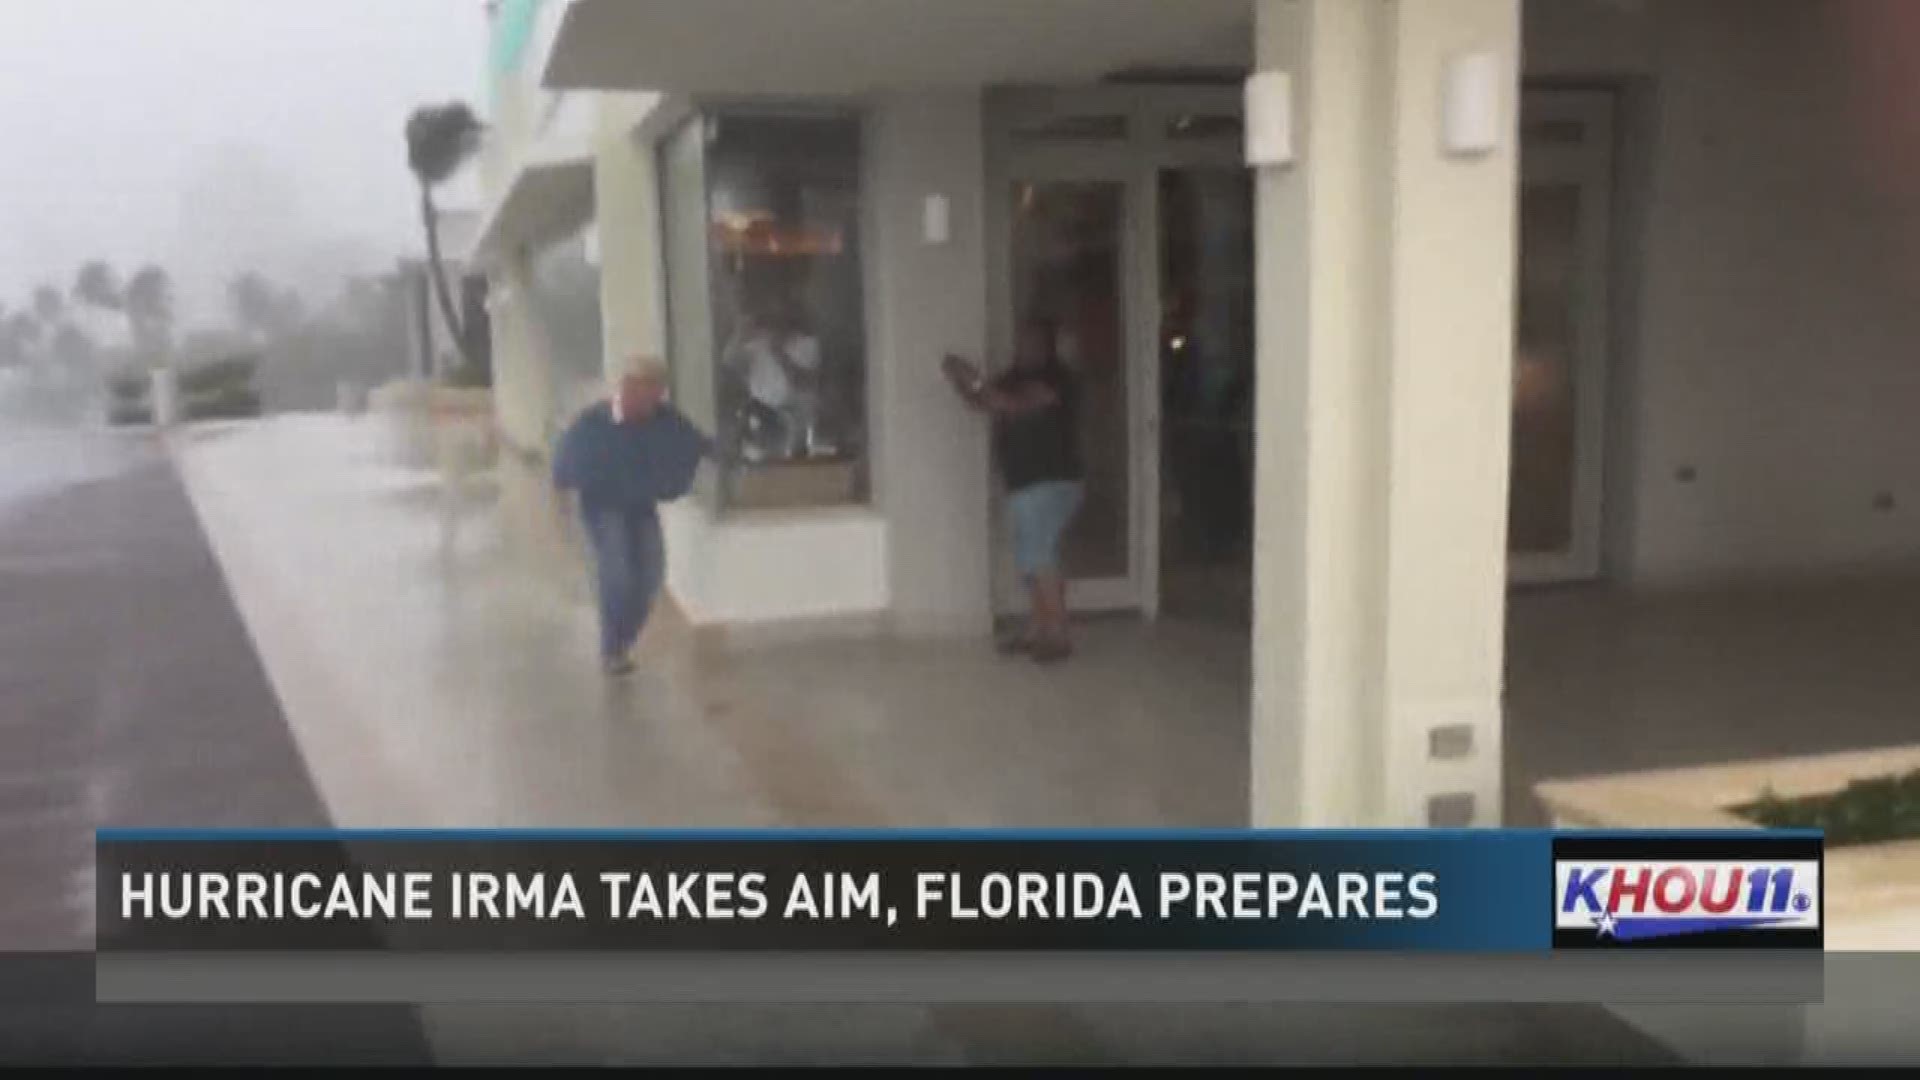 Florida is under a hurricane watch as a "powerful and deadly" Irma roars toward the U.S. mainland.